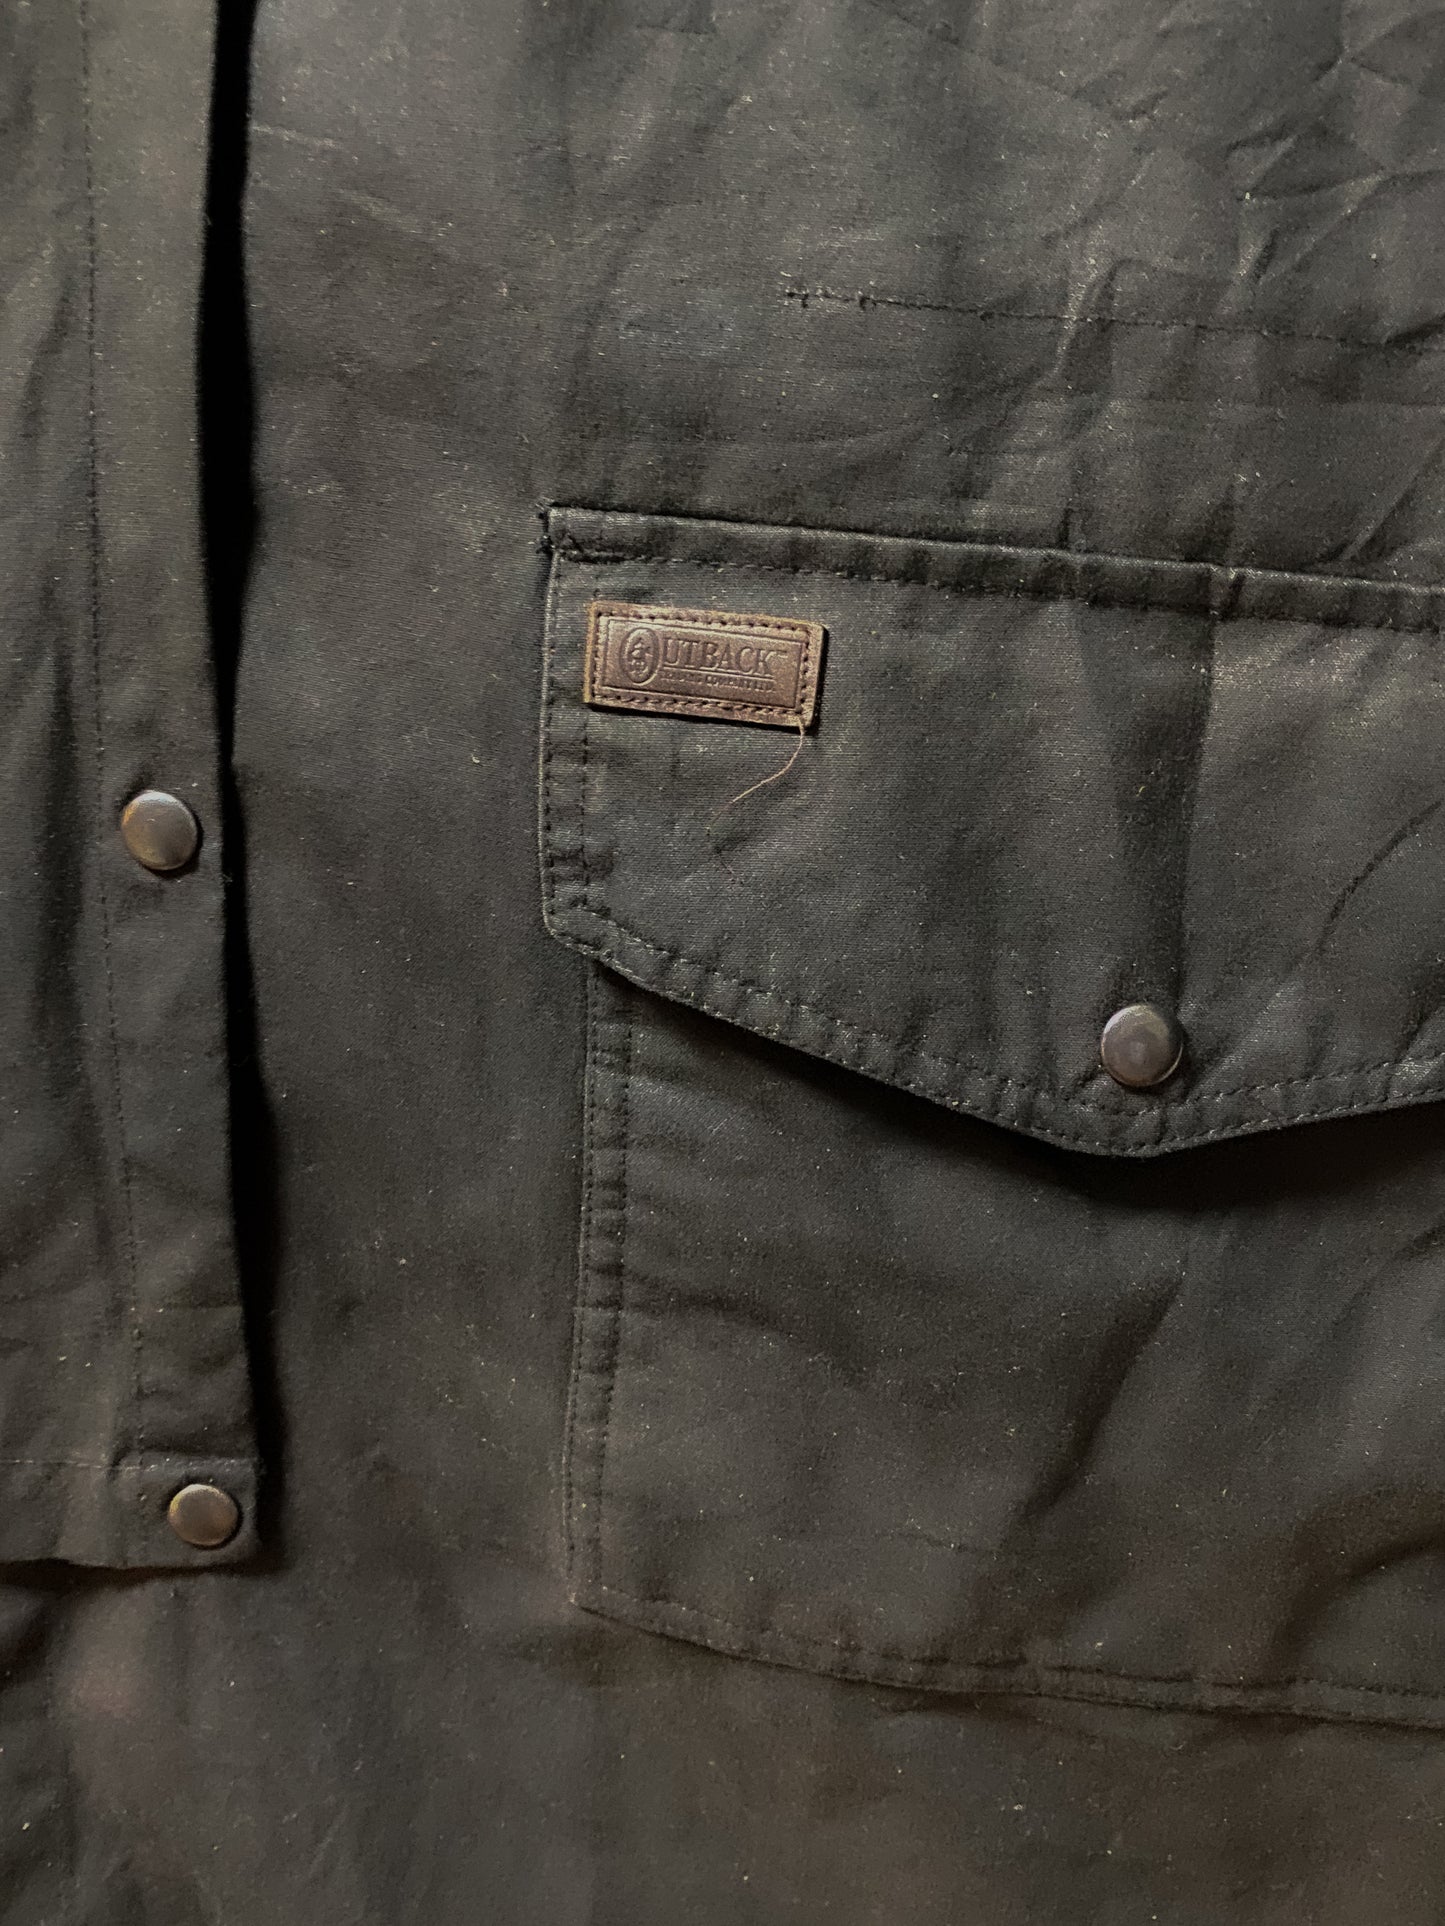 OutBack Oiled Coat